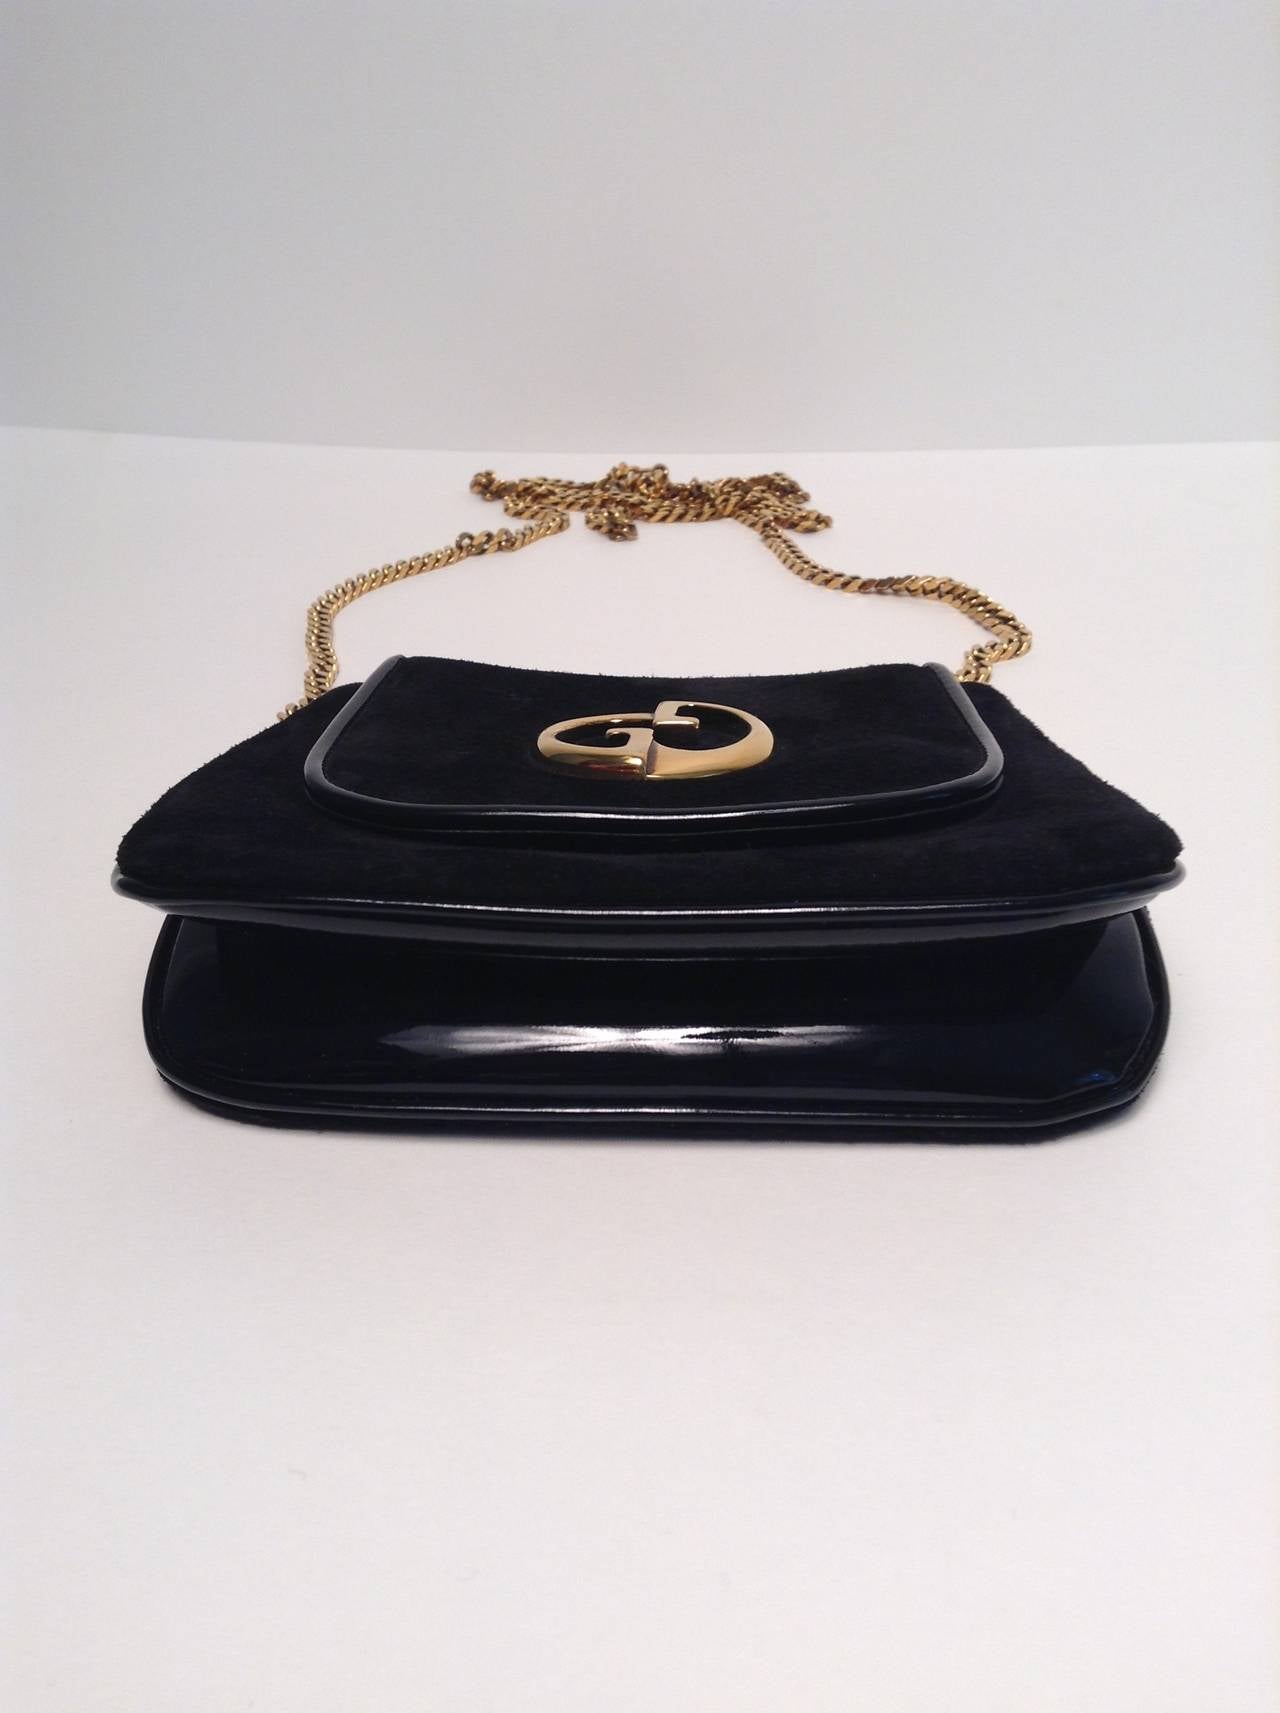 Gucci Black Suede Gold Chain Bag 1973 Reissue 2